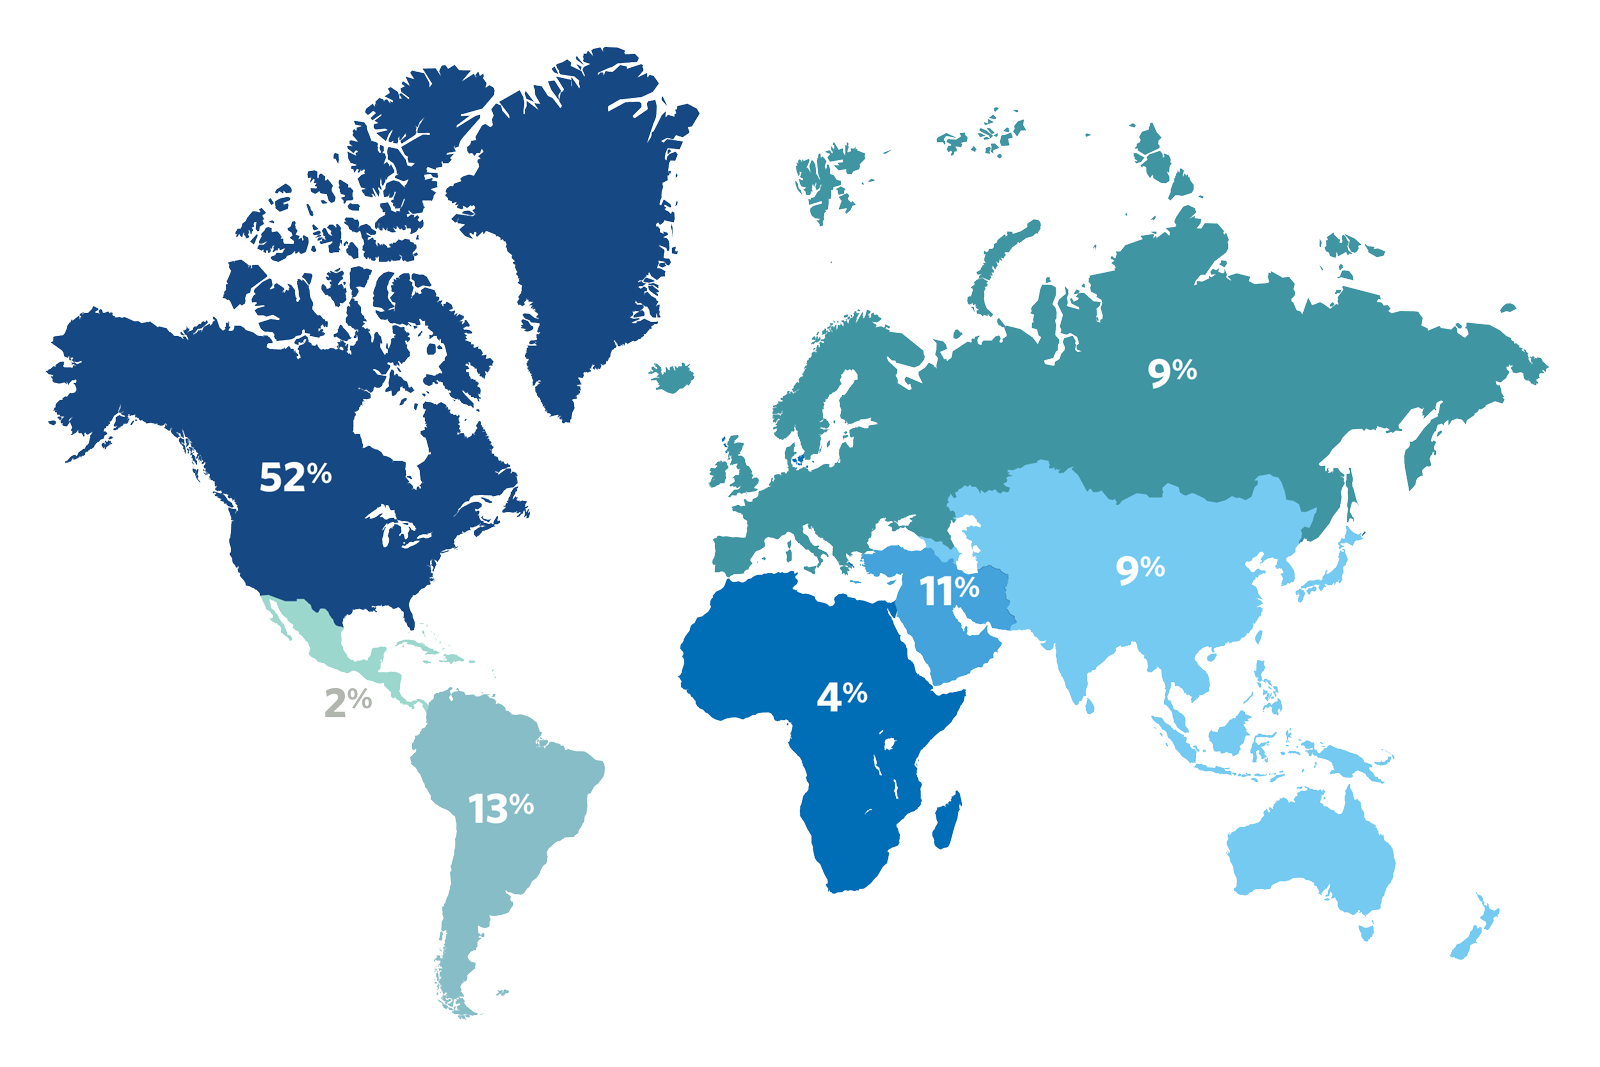 Private Equity participants by region